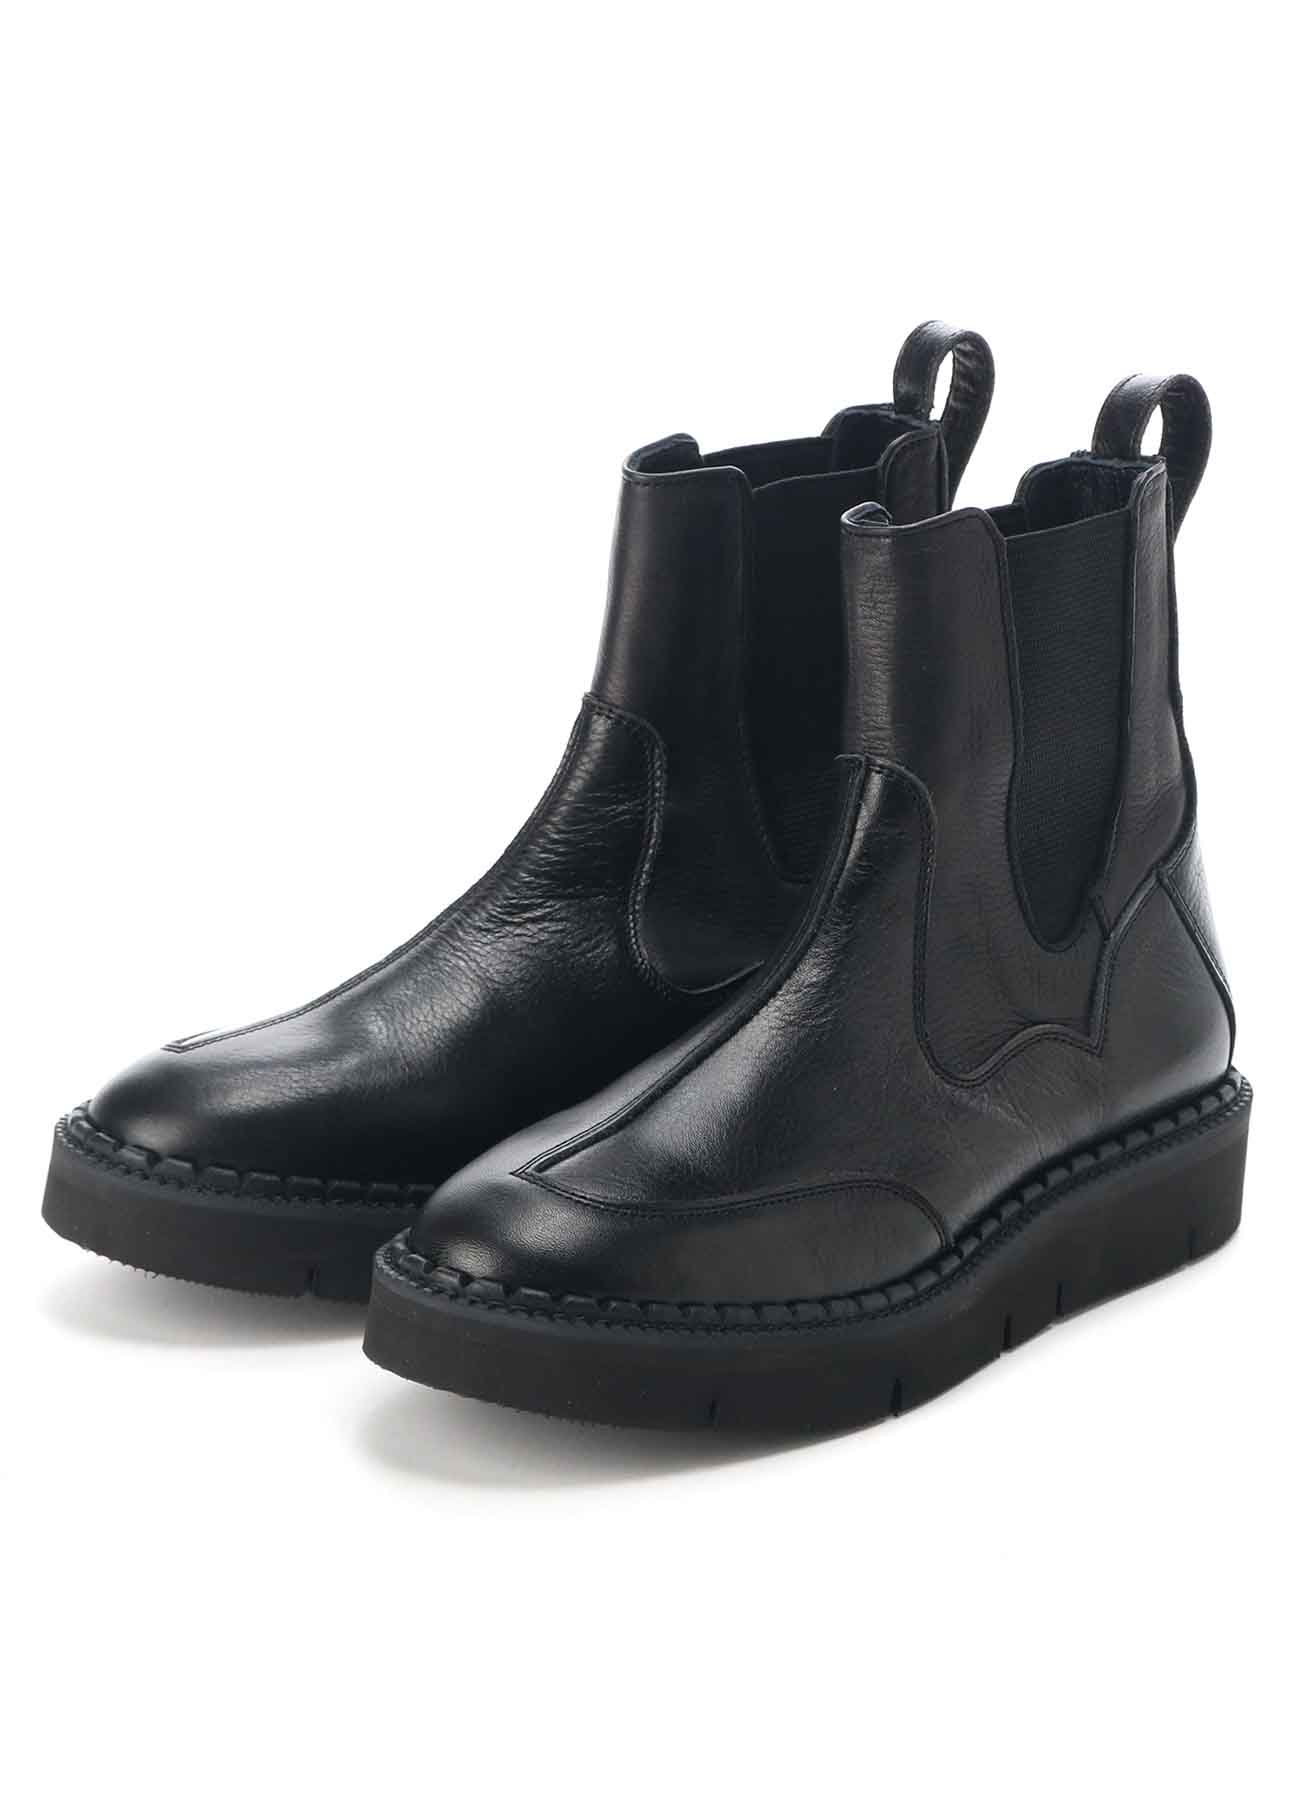 LEATHER COMBI SIDE GORE BOOTS